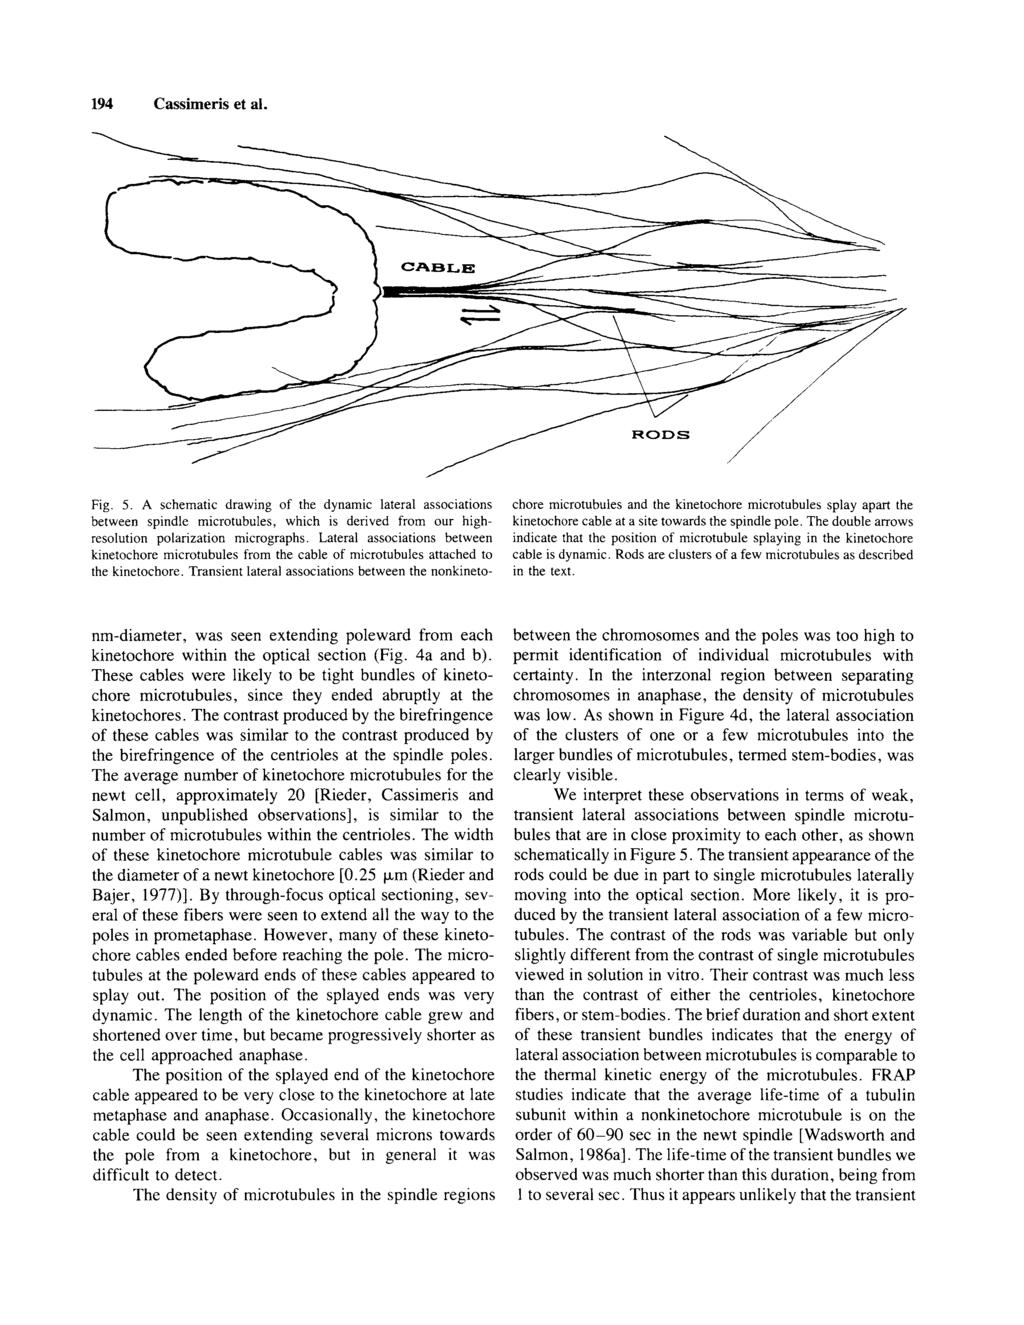 194 Cassimeris et al. Fig. 5. A schematic drawing of the dynamic lateral associations between spindle microtubules, which is derived from our highresolution polarization micrographs.